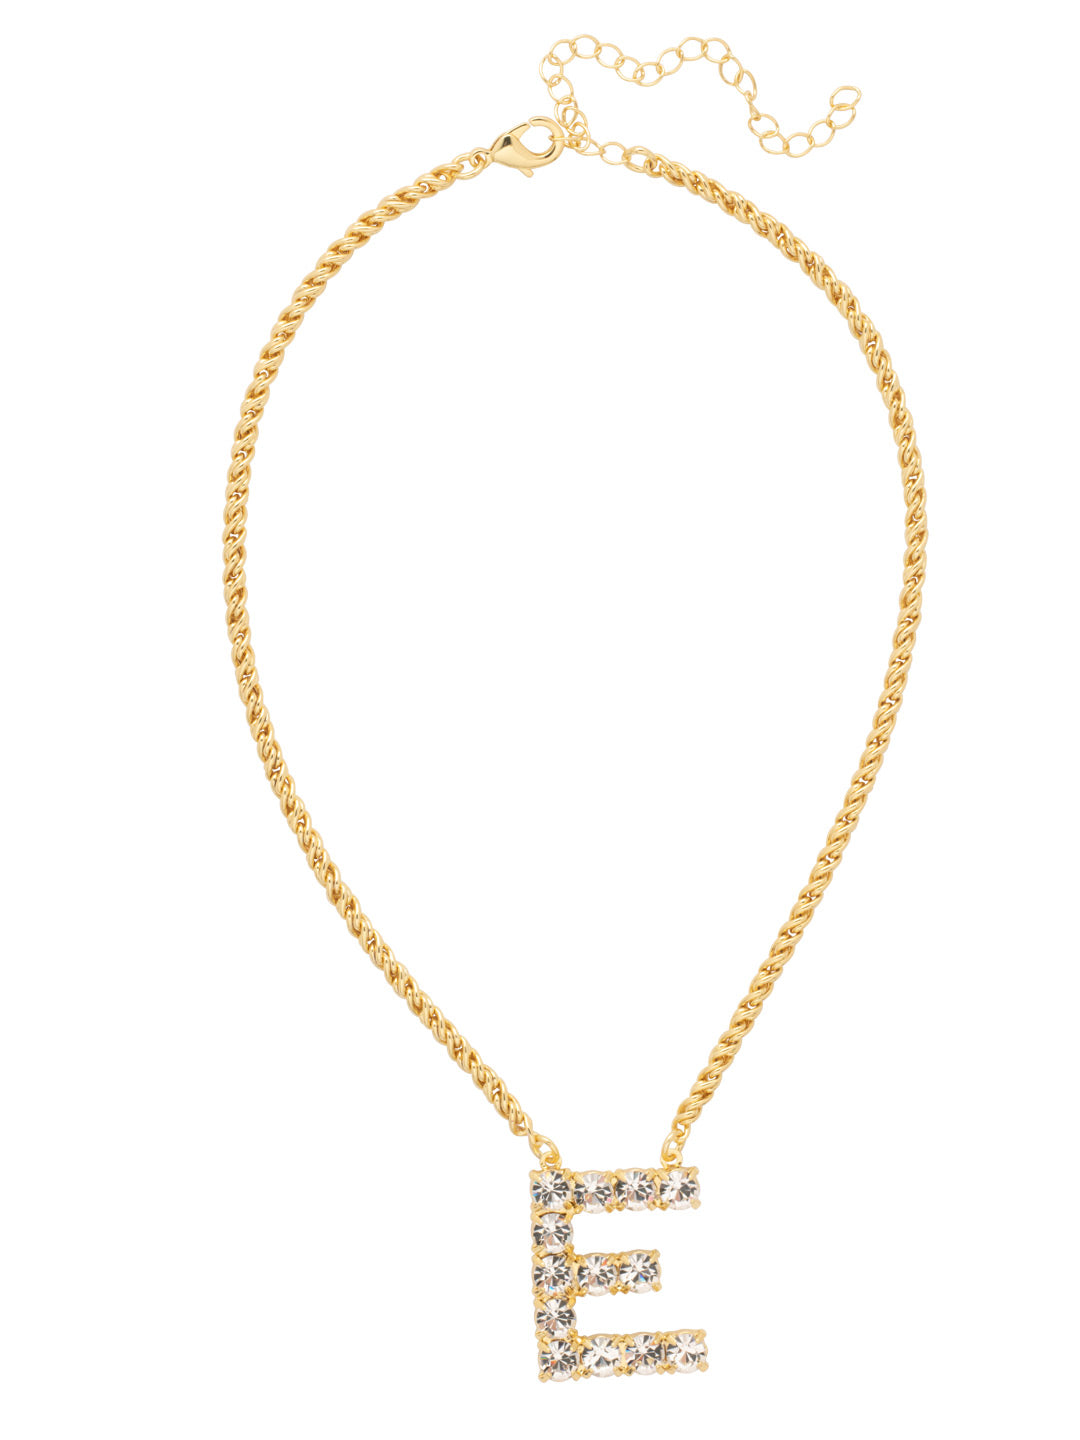 E Initial Rope Pendant Necklace - NFK24BGCRY - <p>The Initial Rope Pendant Necklace features a crystal encrusted metal monogram pendant on an adjustable rope chain, secured with a lobster claw clasp. From Sorrelli's Crystal collection in our Bright Gold-tone finish.</p>